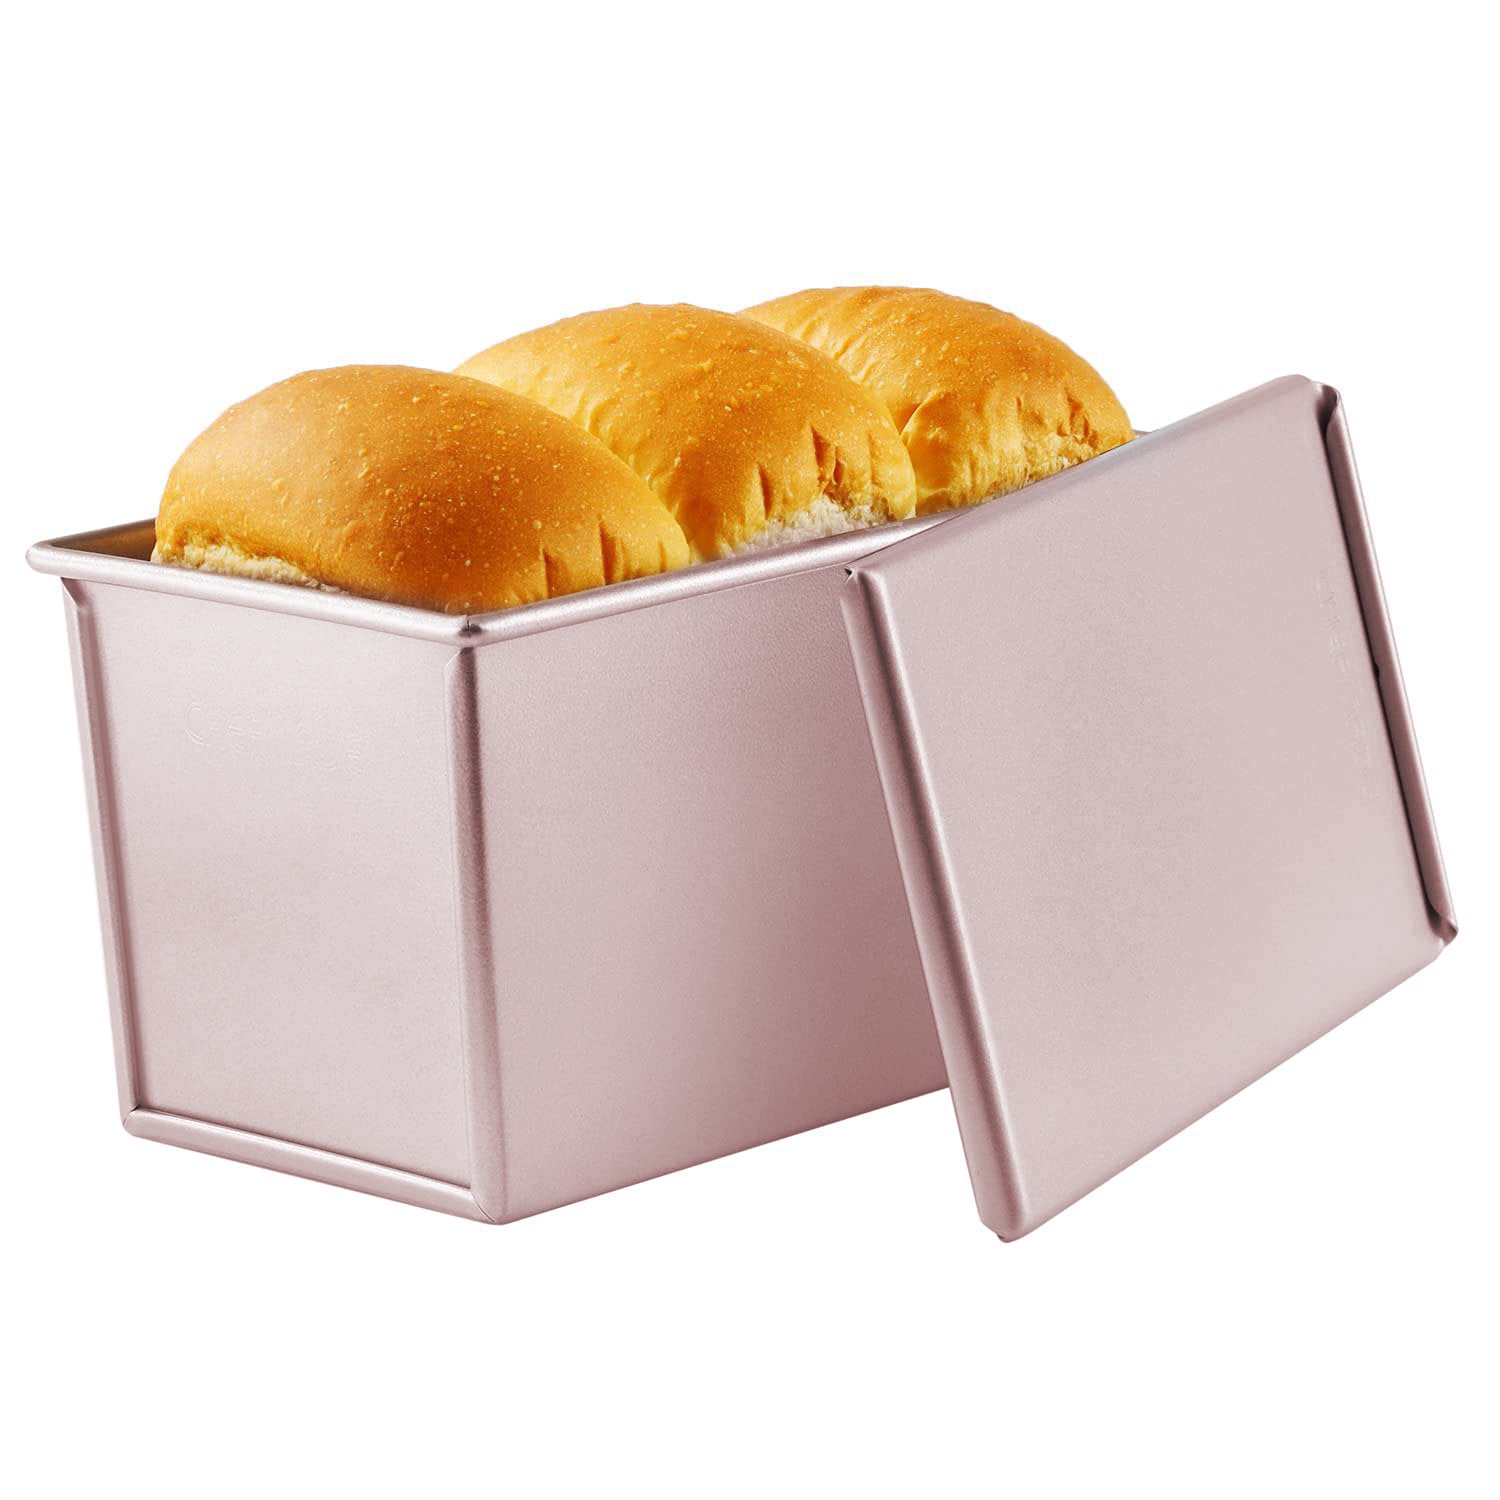 CHEFMADE 450g Non-Stick Covered Loaf Pan (CS) (WK9088)